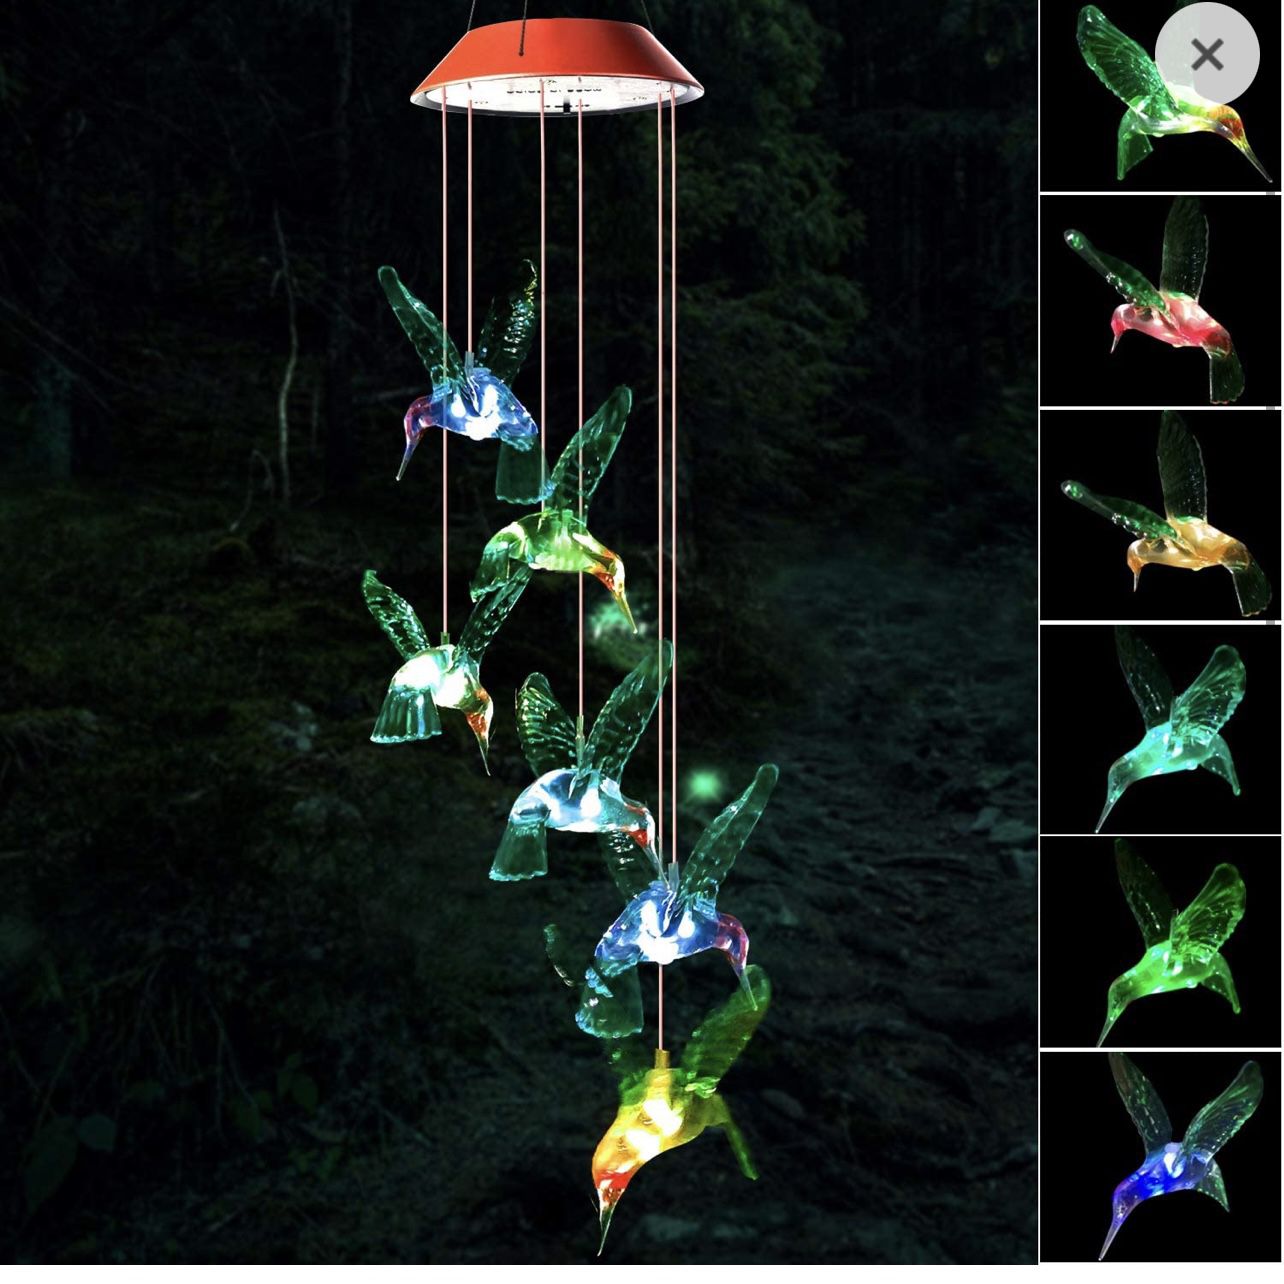 Solar Hummingbird Wind Chime Outdoor Indoor, Color Changing Led Solar Power Wind Chime Light, Colorful Decorative Mobile Hanging Wind Chime Personaliz